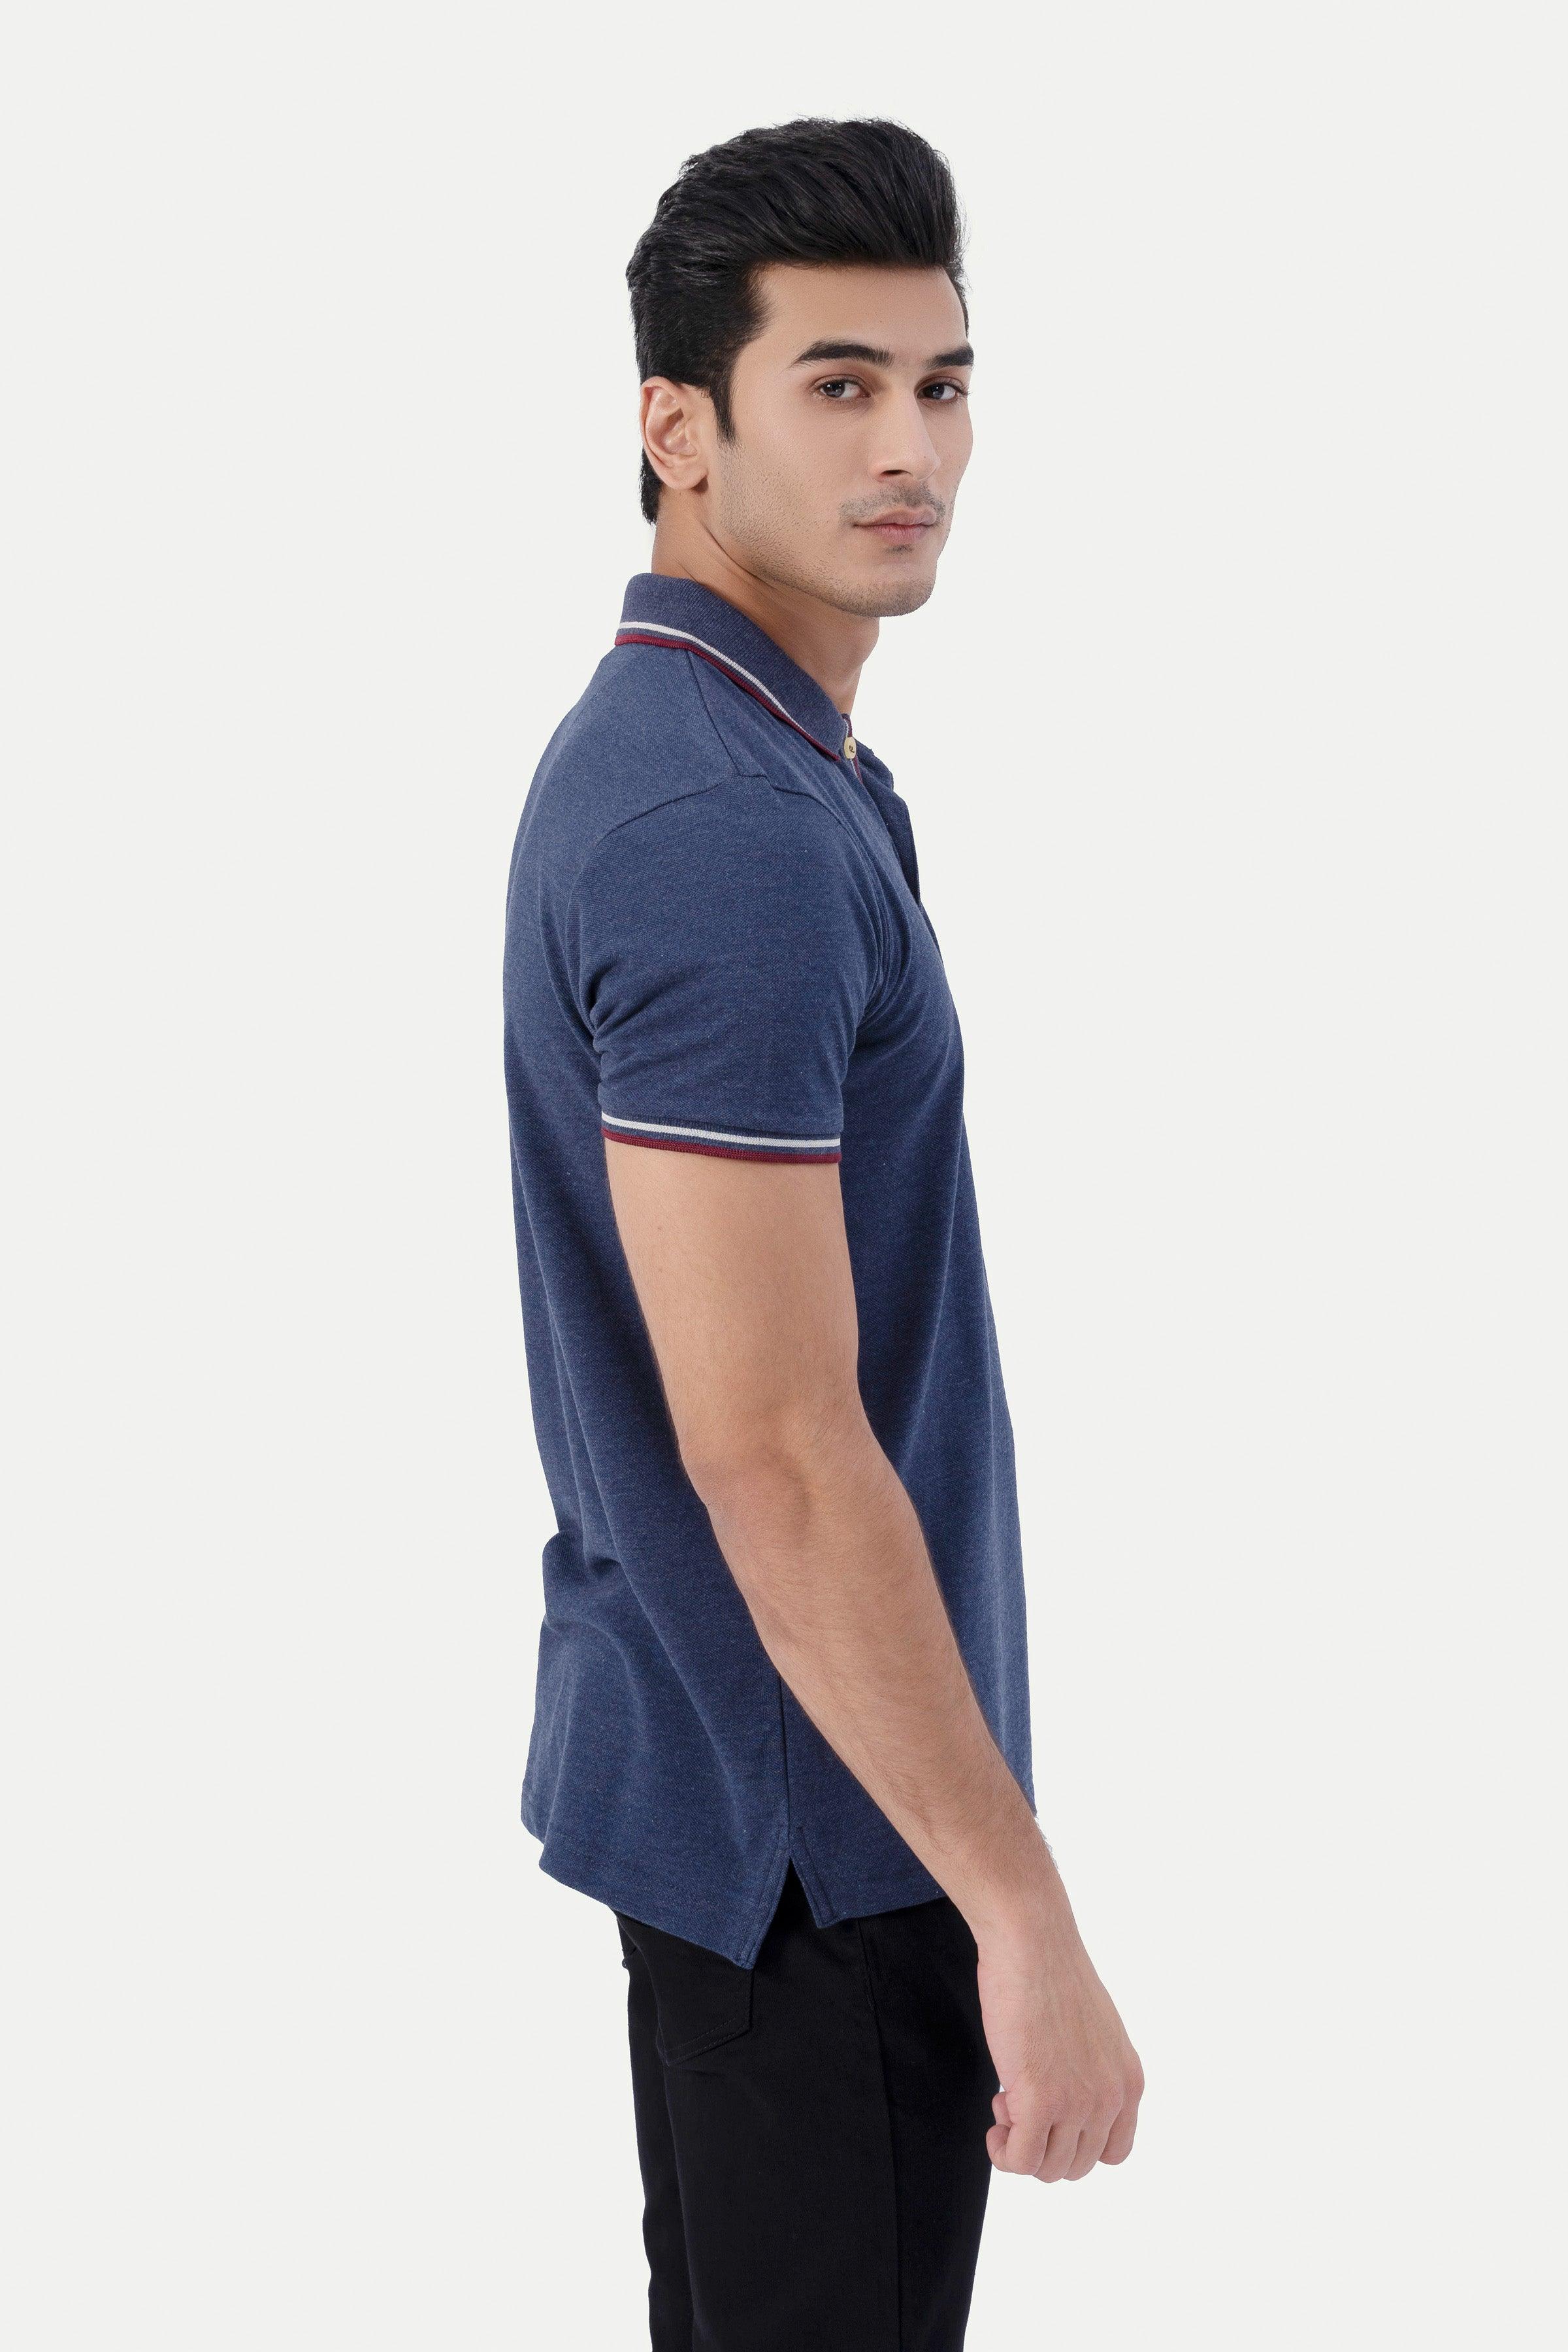 TIPPING POLO BLUE at Charcoal Clothing